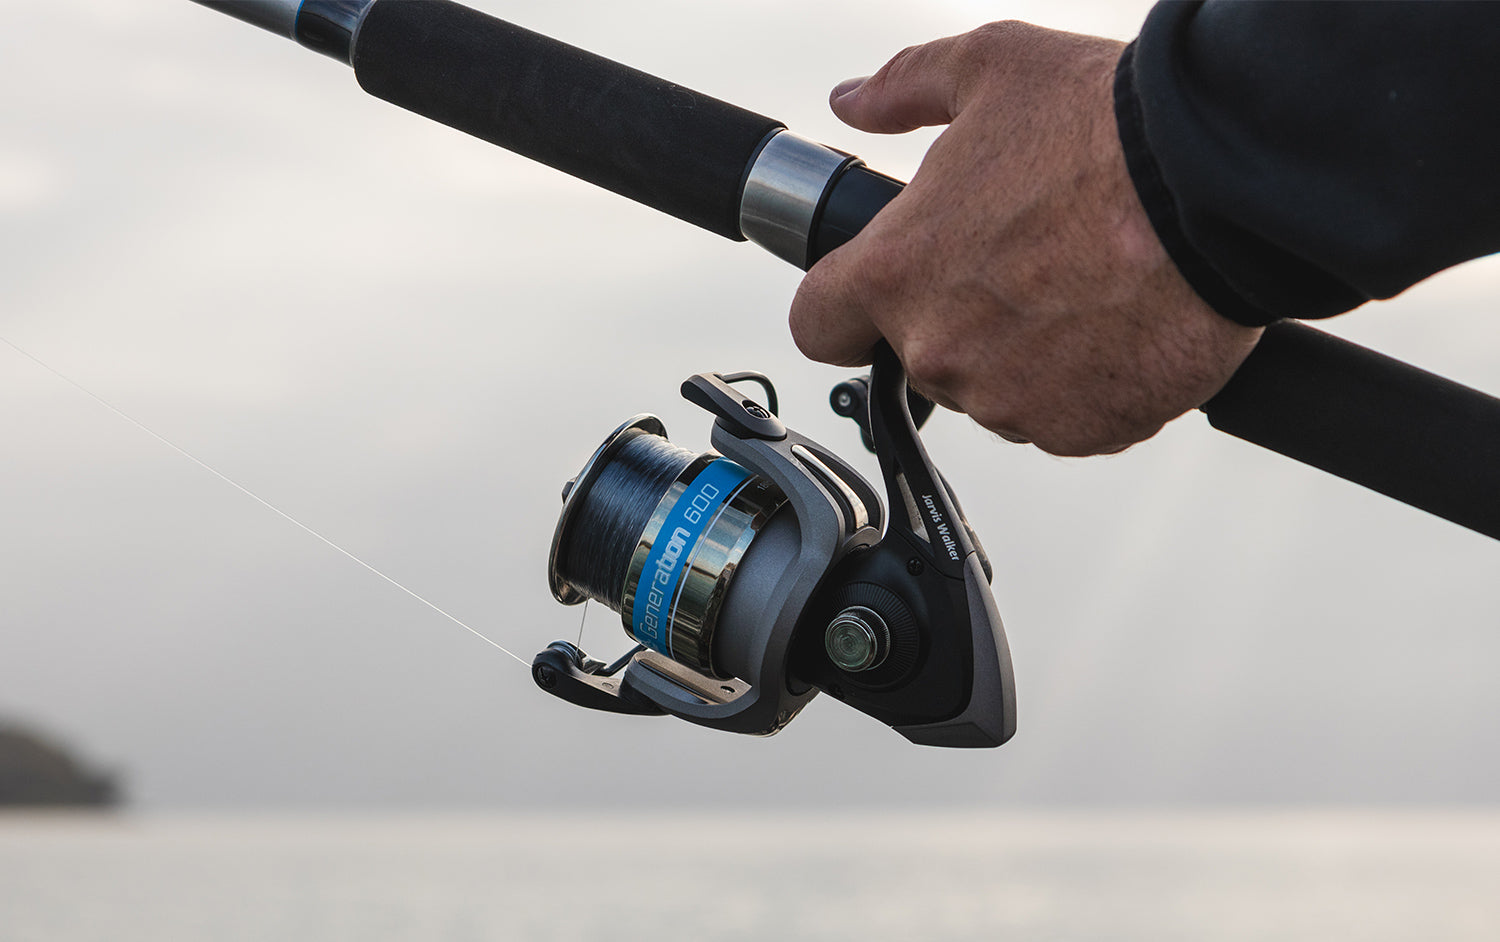 Best Spinning Reels For Bass Fishing Reviewed [2023] - Buyer's Guide